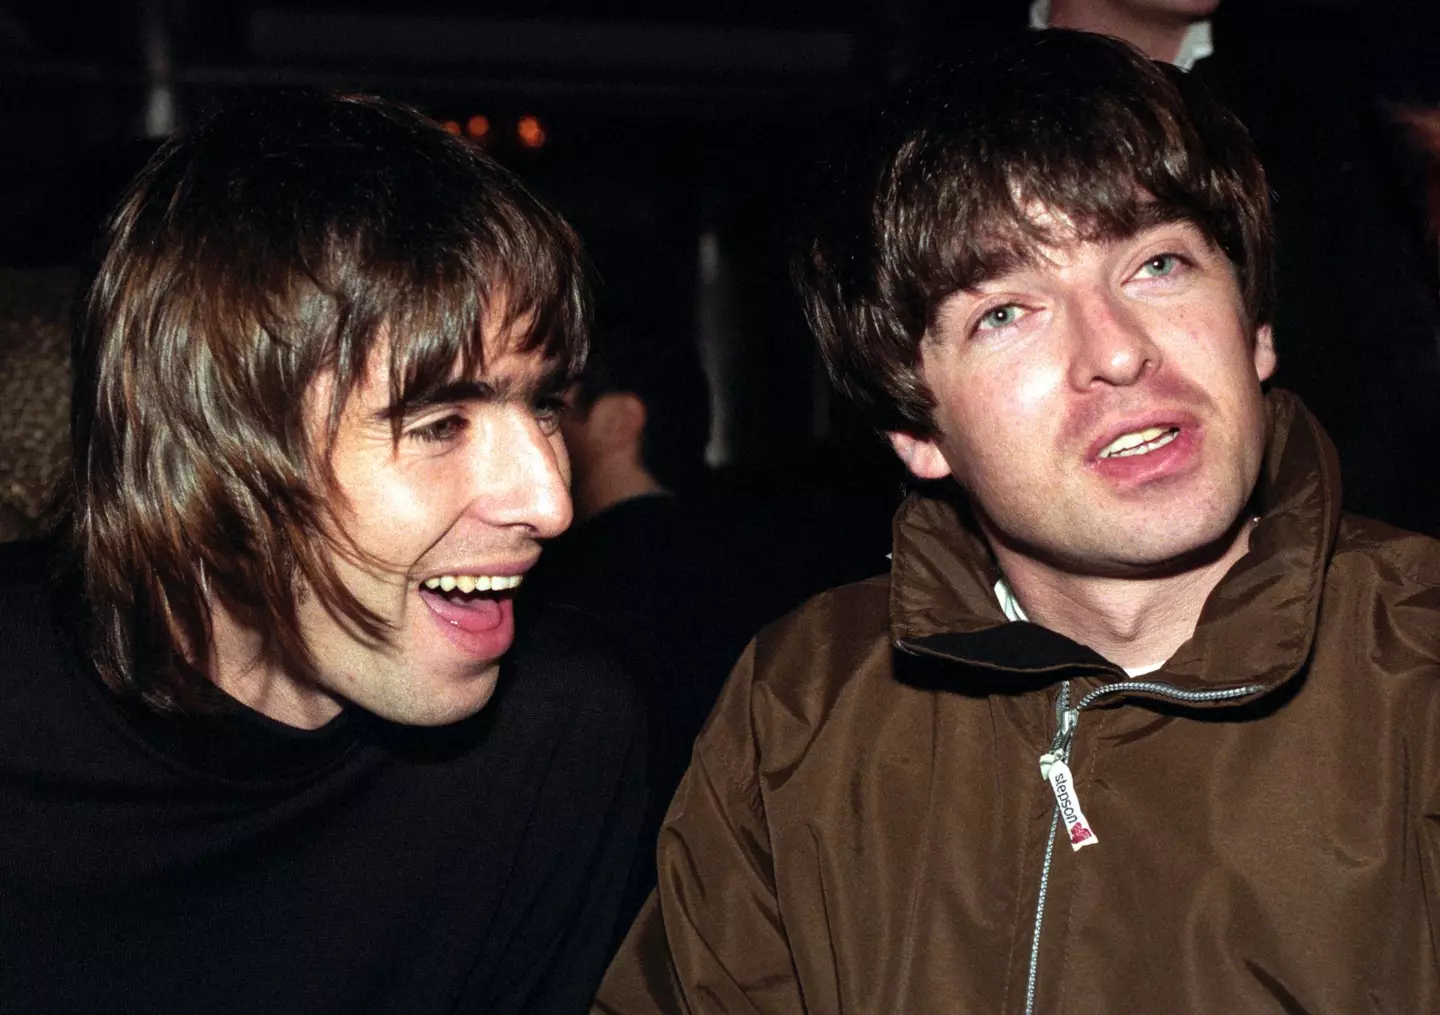 Liam Gallagher has taken to Twitter to target his brother again.